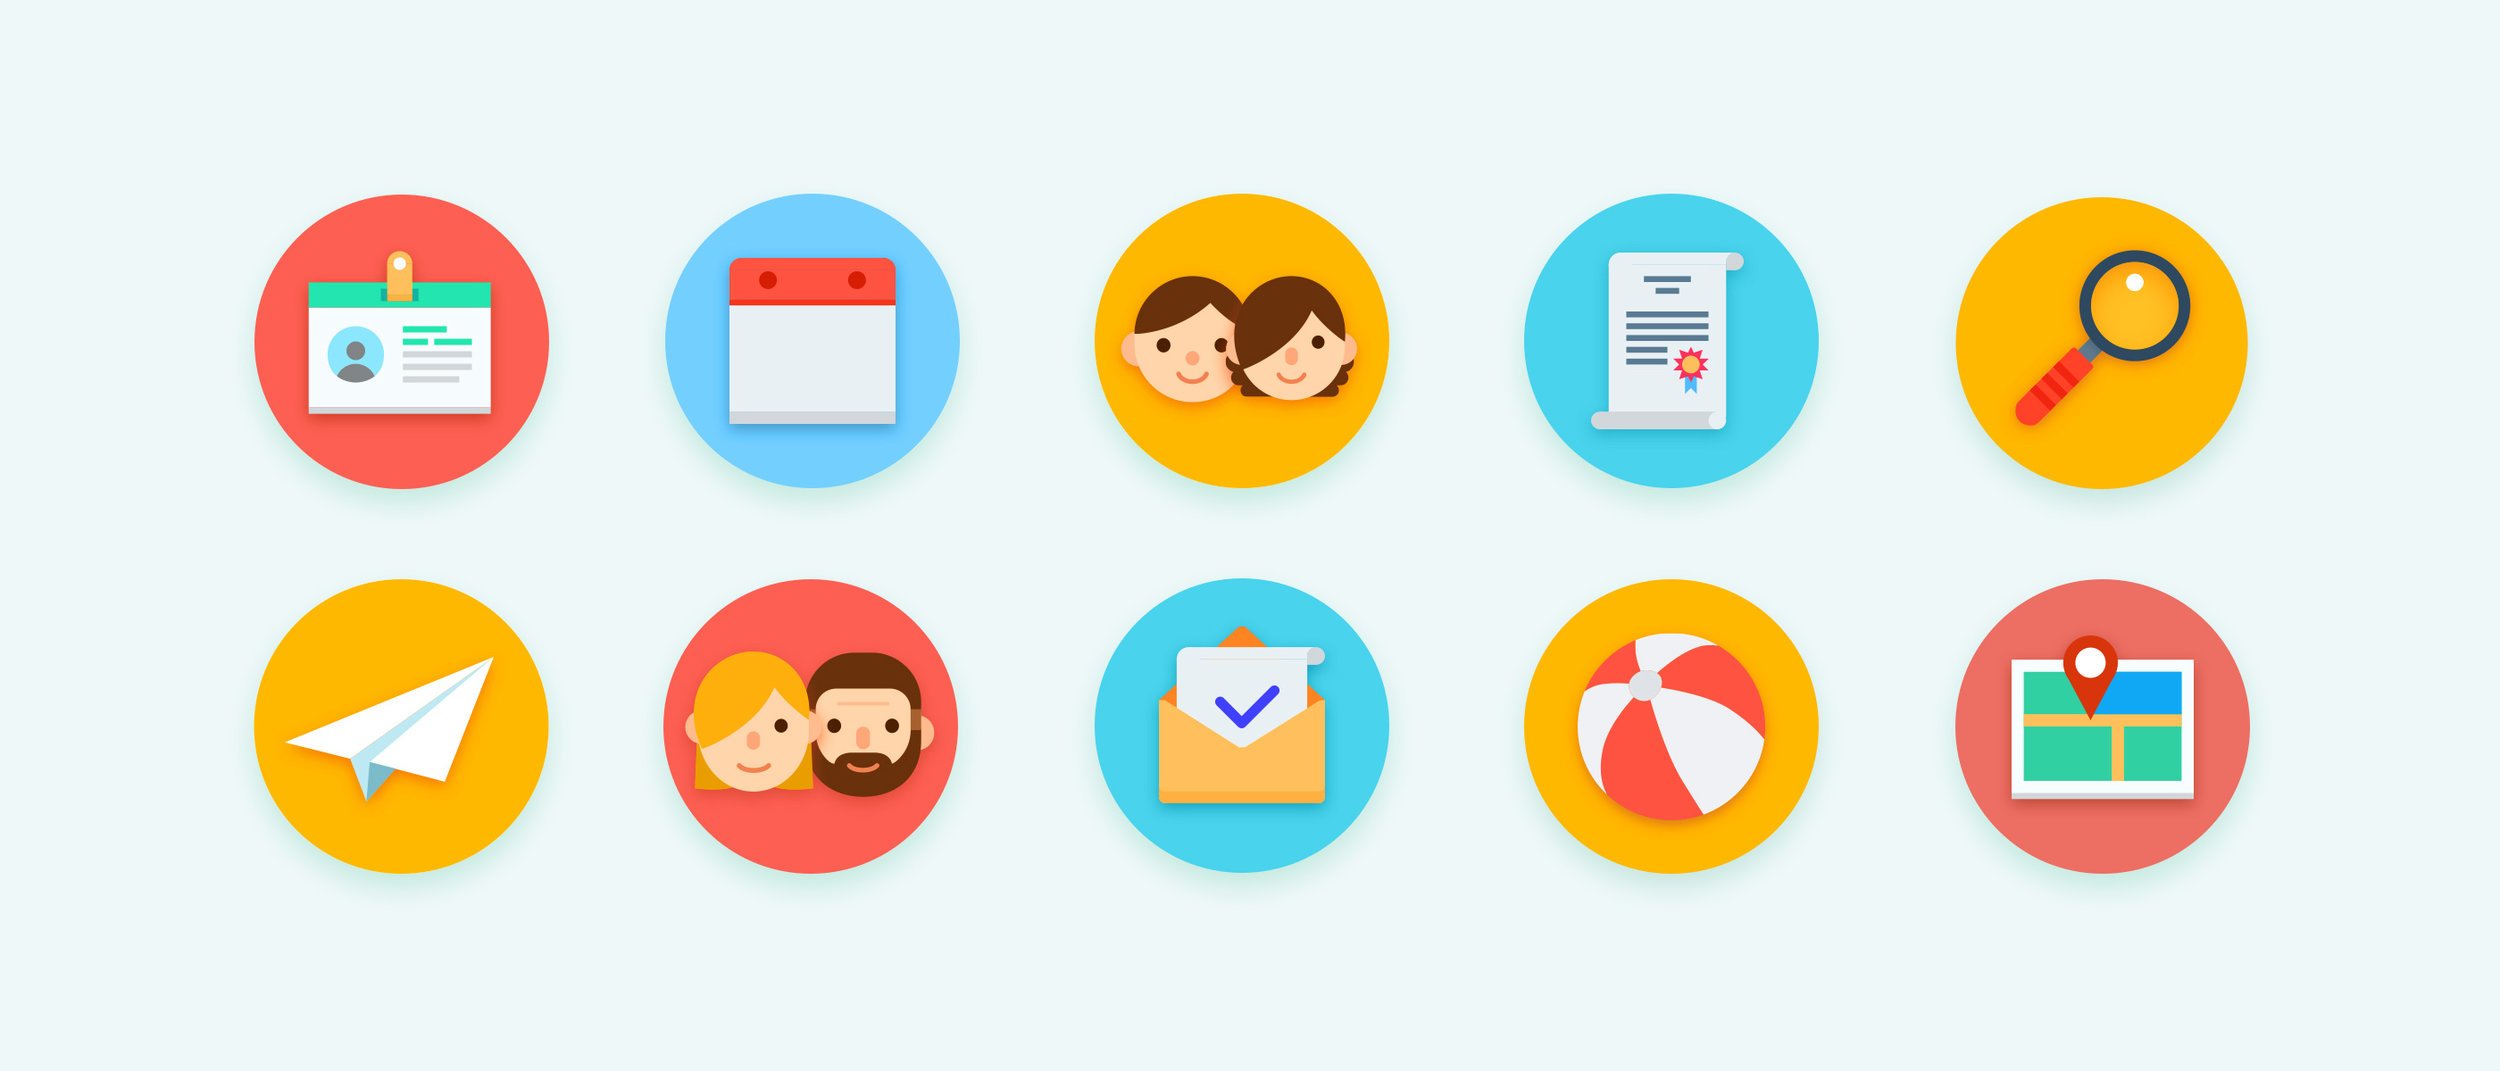 Good vibes and colourful icons